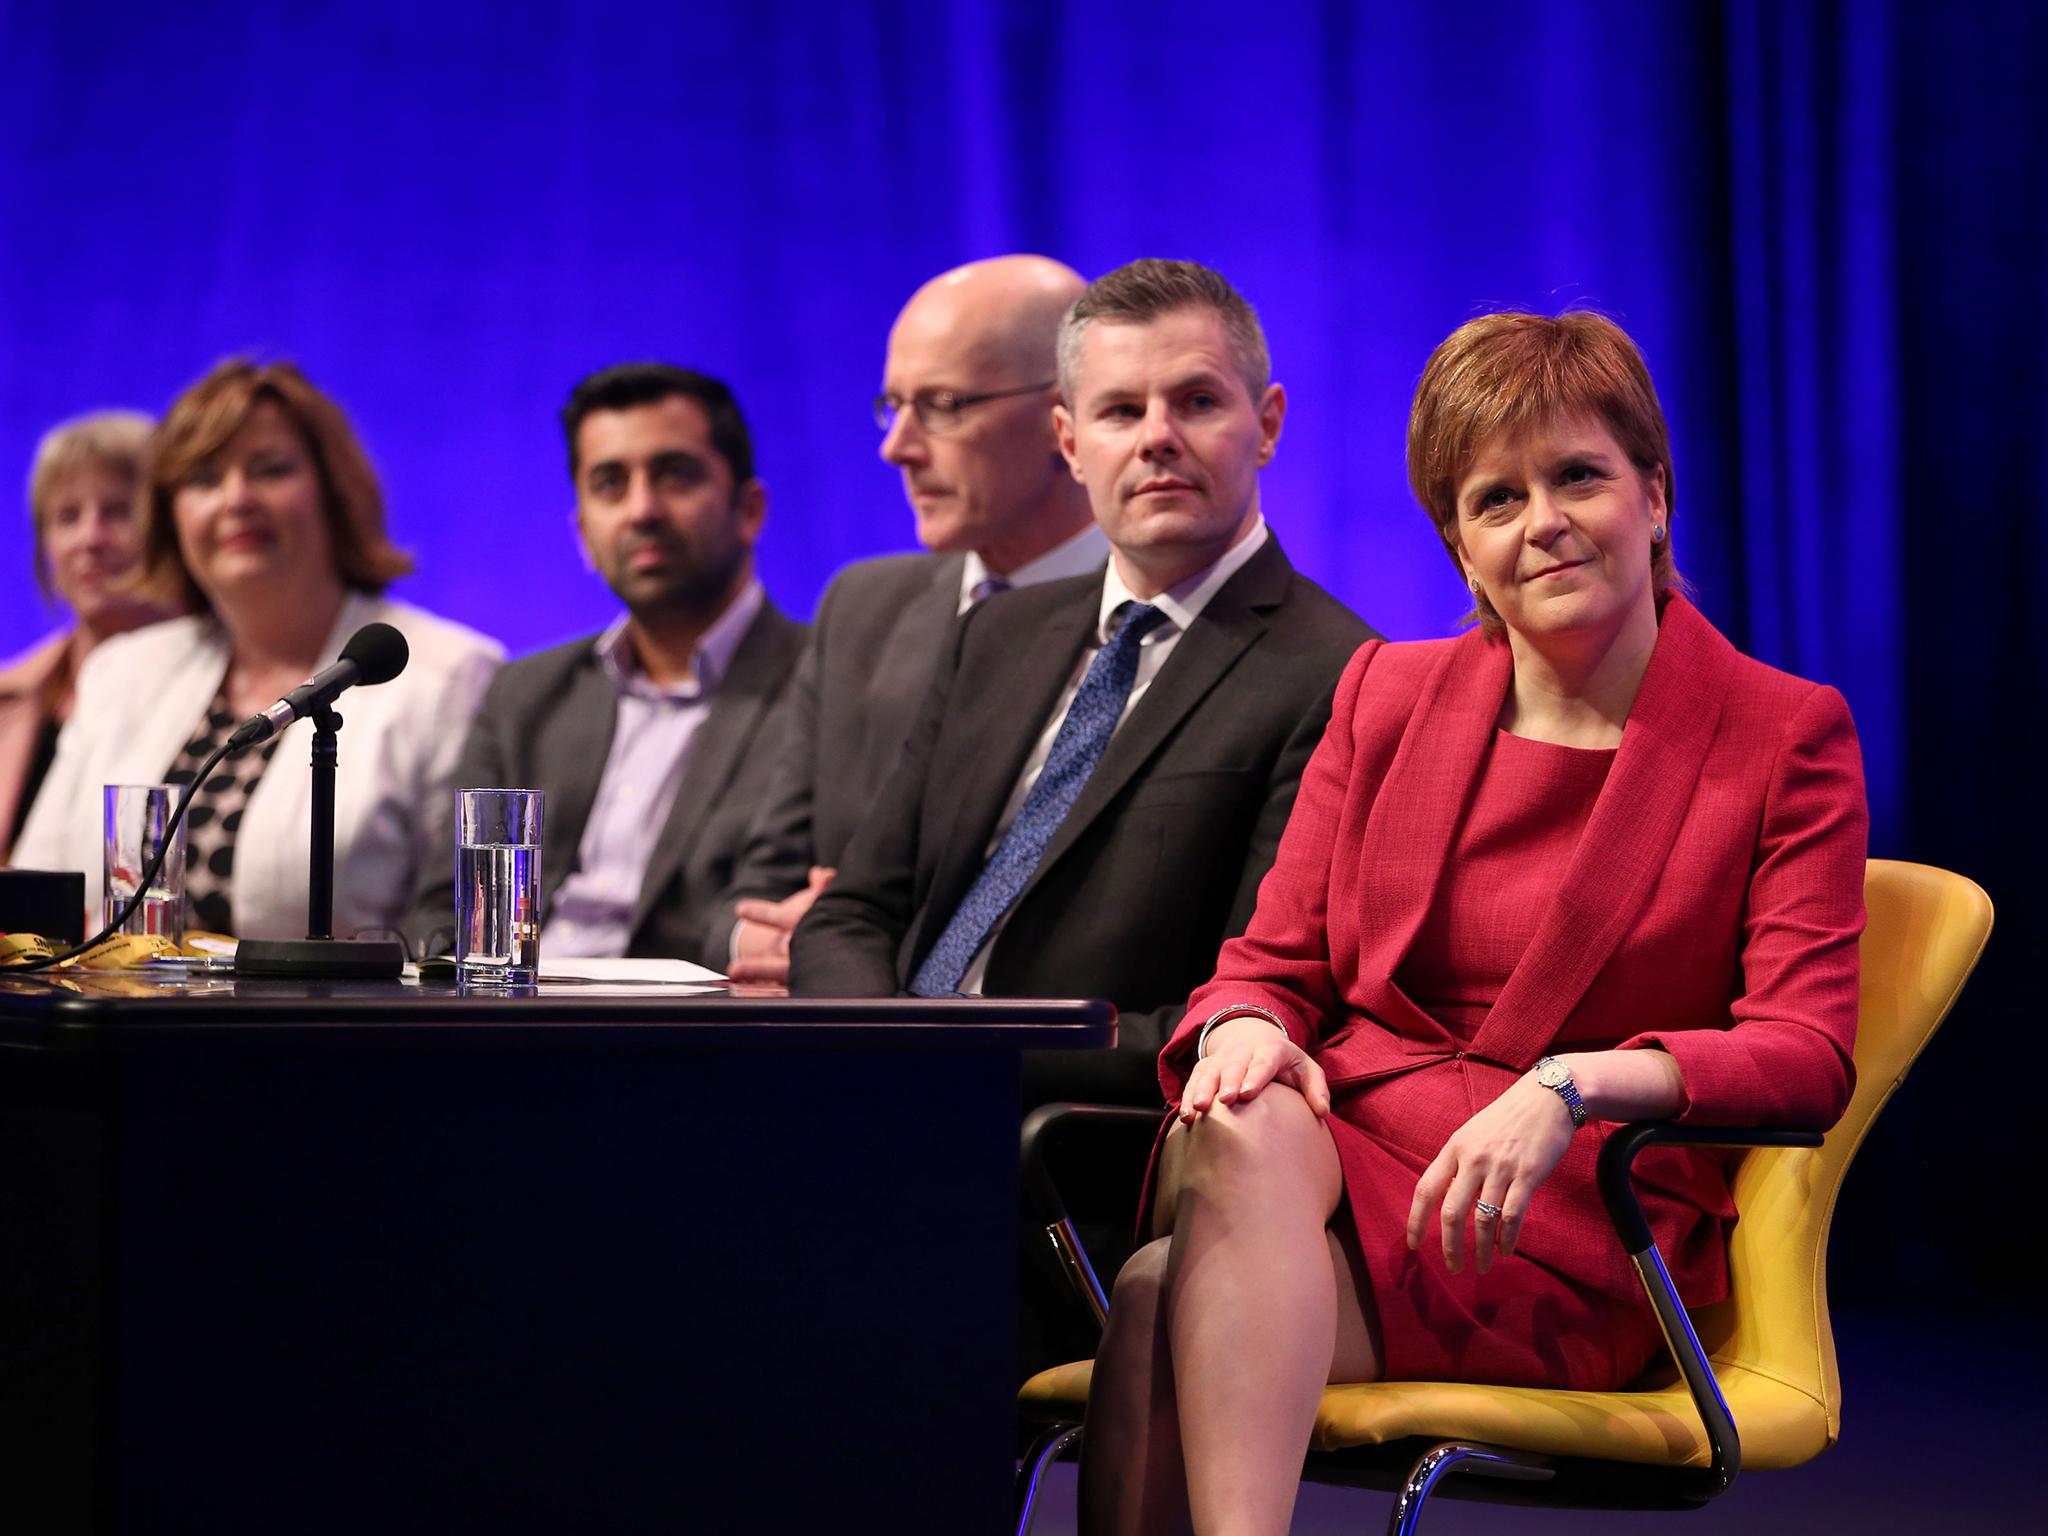 Positioning: Nicola Sturgeon (right) and her Cabinet want to set themselves apart from the Tory Government